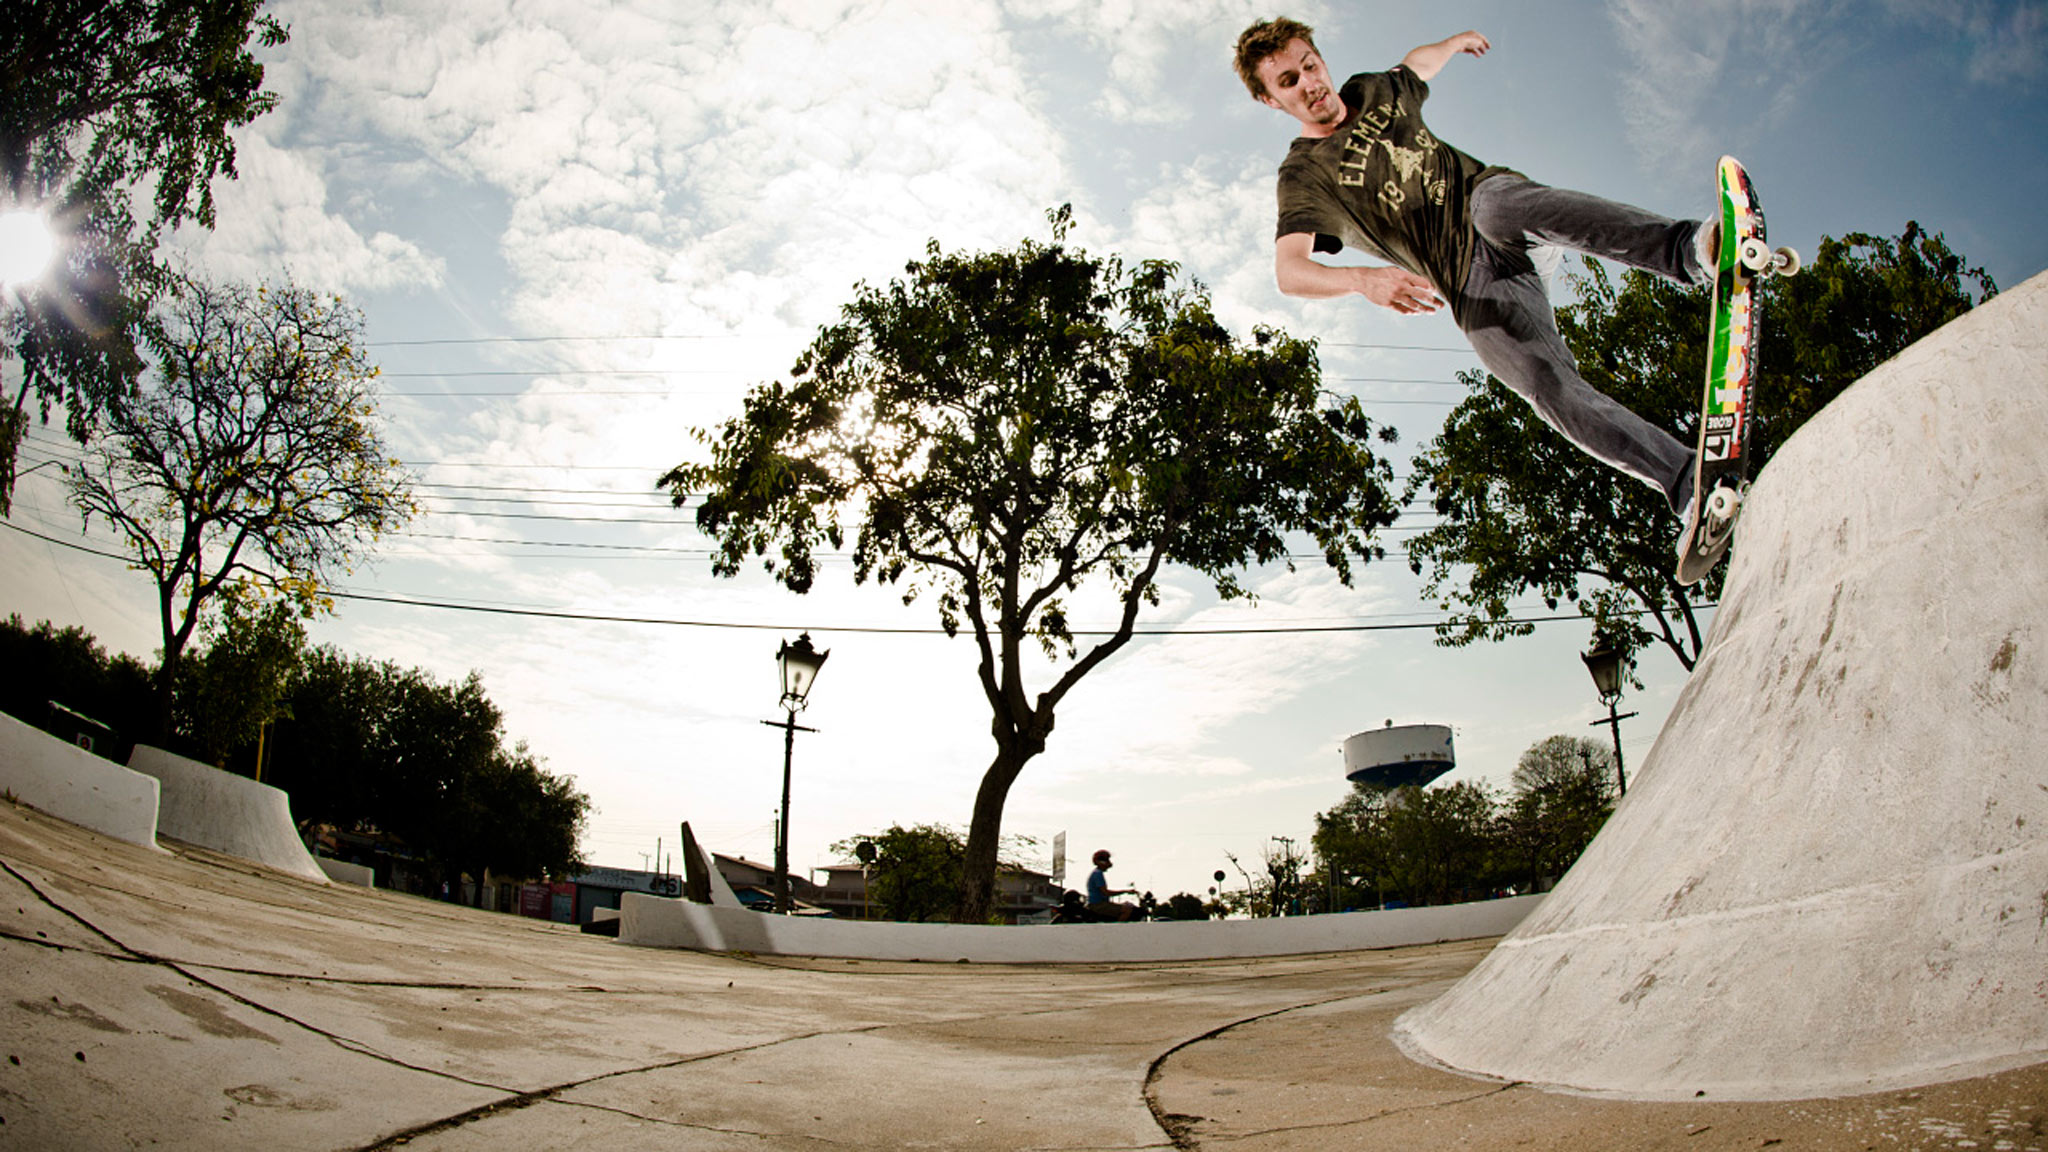 Lucas Xaparral is one of the five local skaters invited to the Select Series in Foz do Iguau, Brazil.